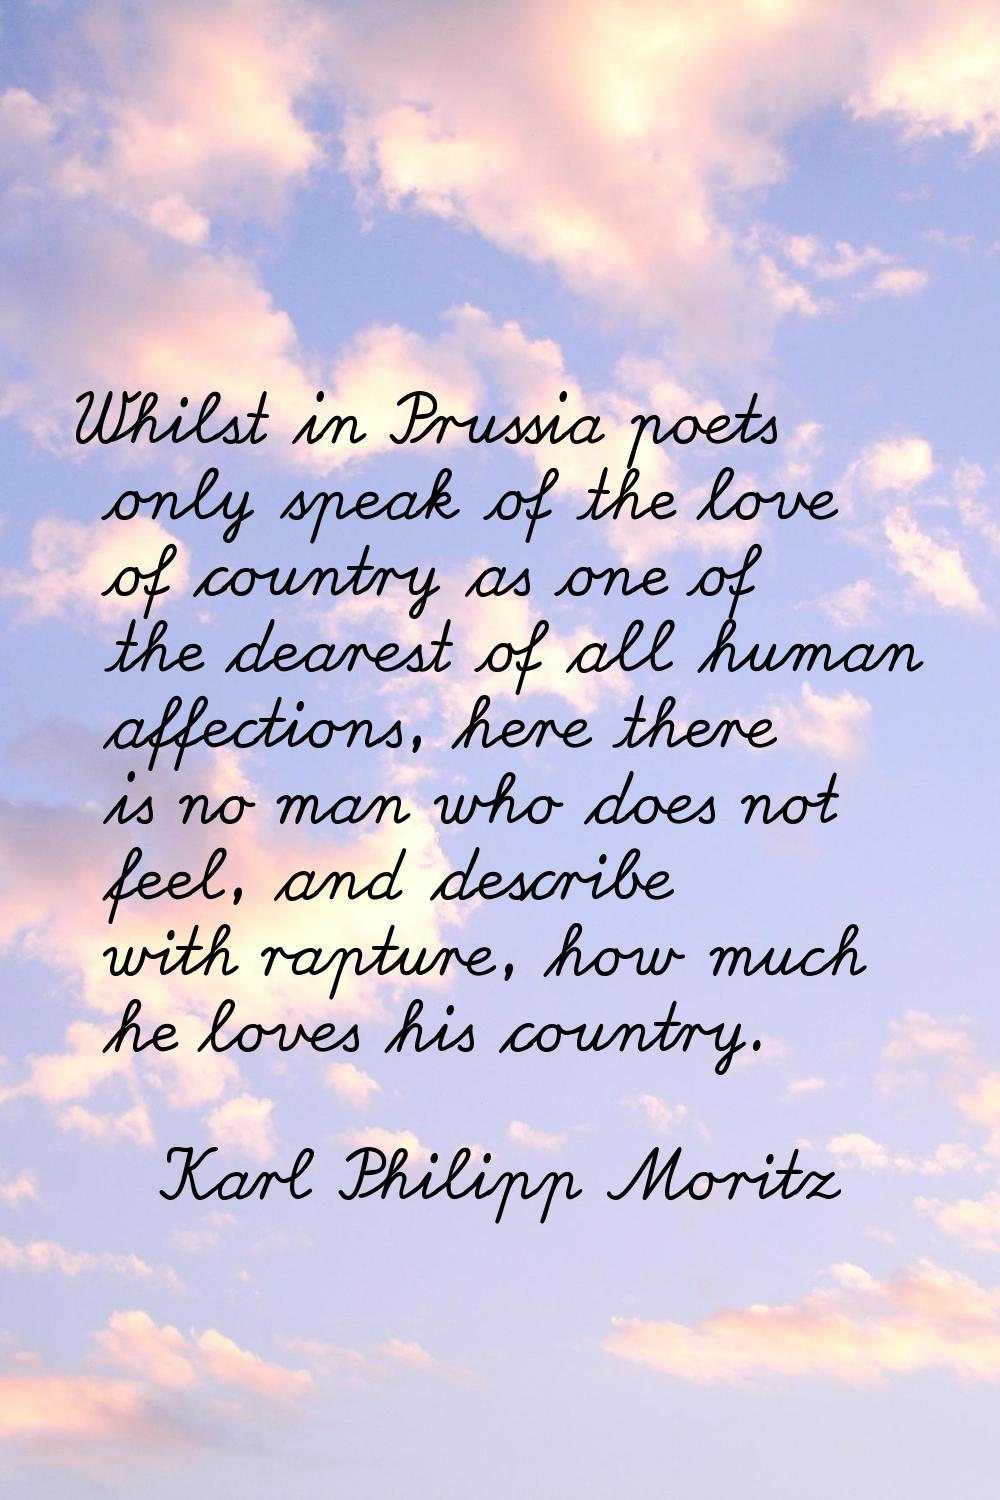 Whilst in Prussia poets only speak of the love of country as one of the dearest of all human affect